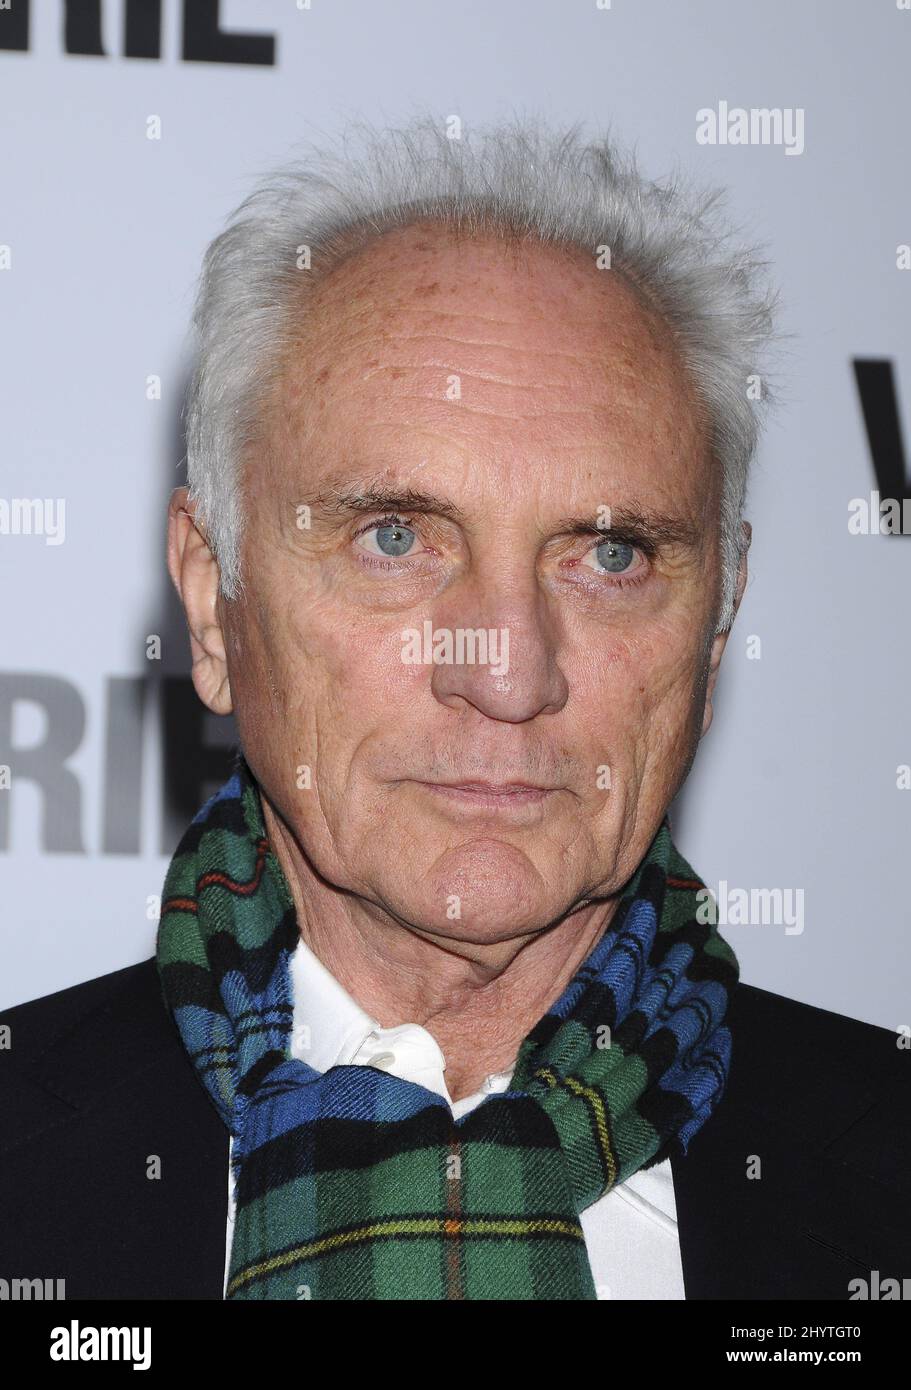 Terence Stamp attending the 'Valkyrie' Los Angeles Premiere. Held at the Directors Guild of America. Stock Photo